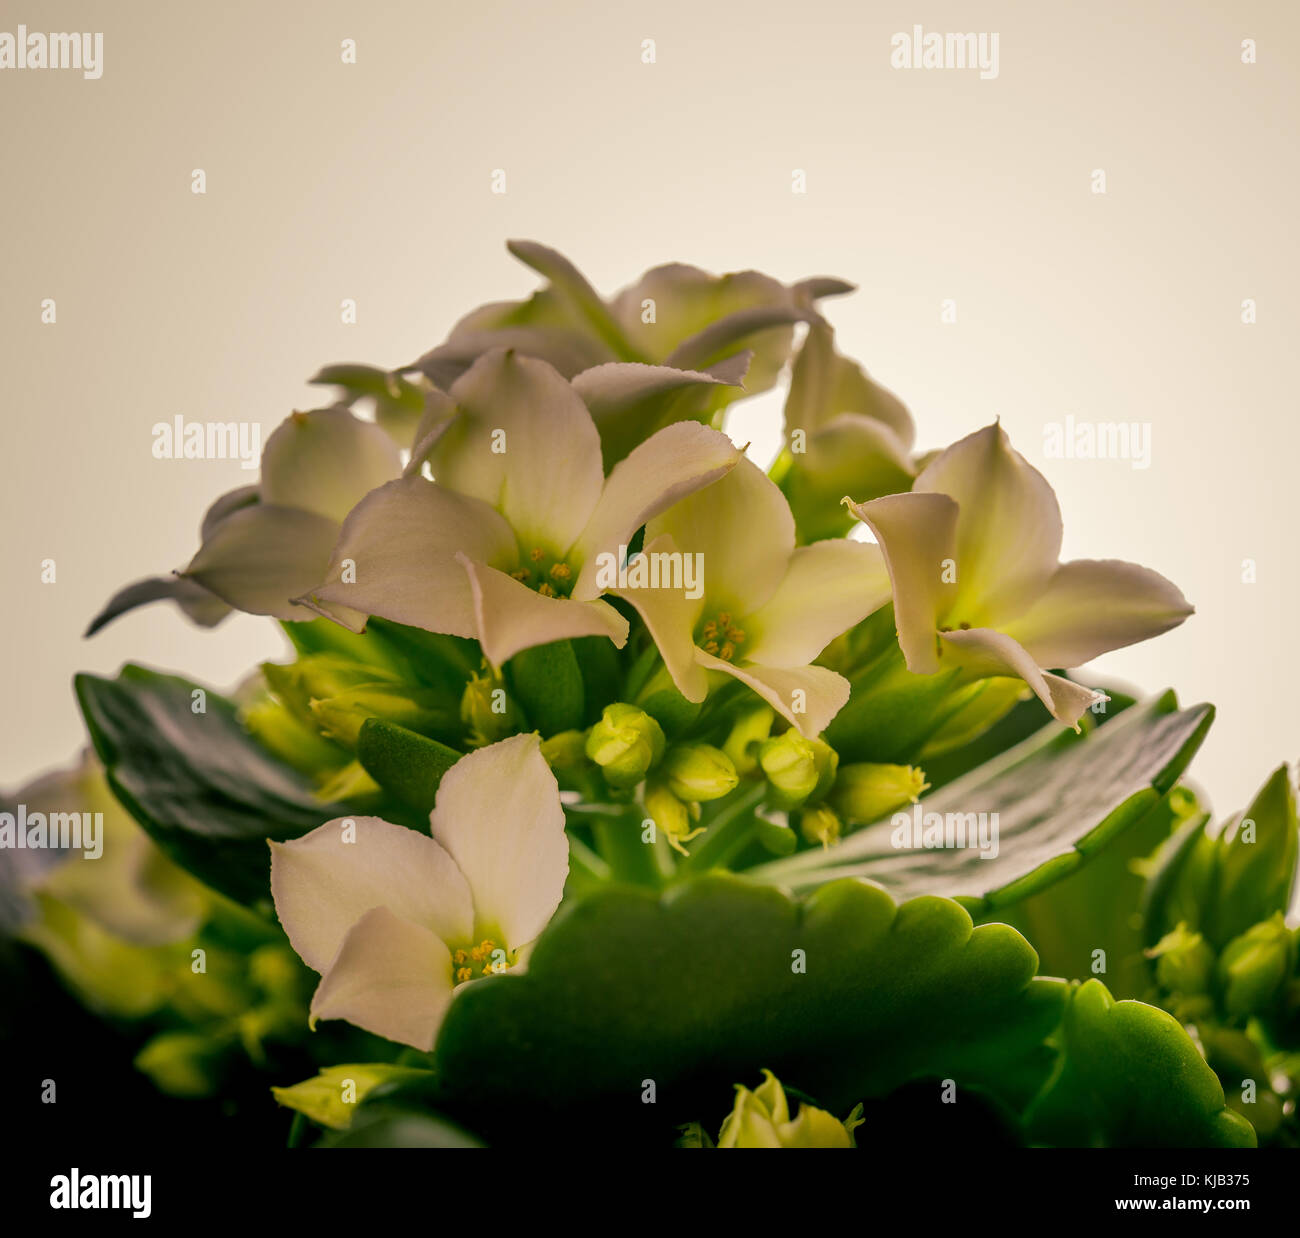 Square photo with single kalanchoe flower. The plant has hard green leaves and several light small blooms with creamy color. Blooms are in group on th Stock Photo